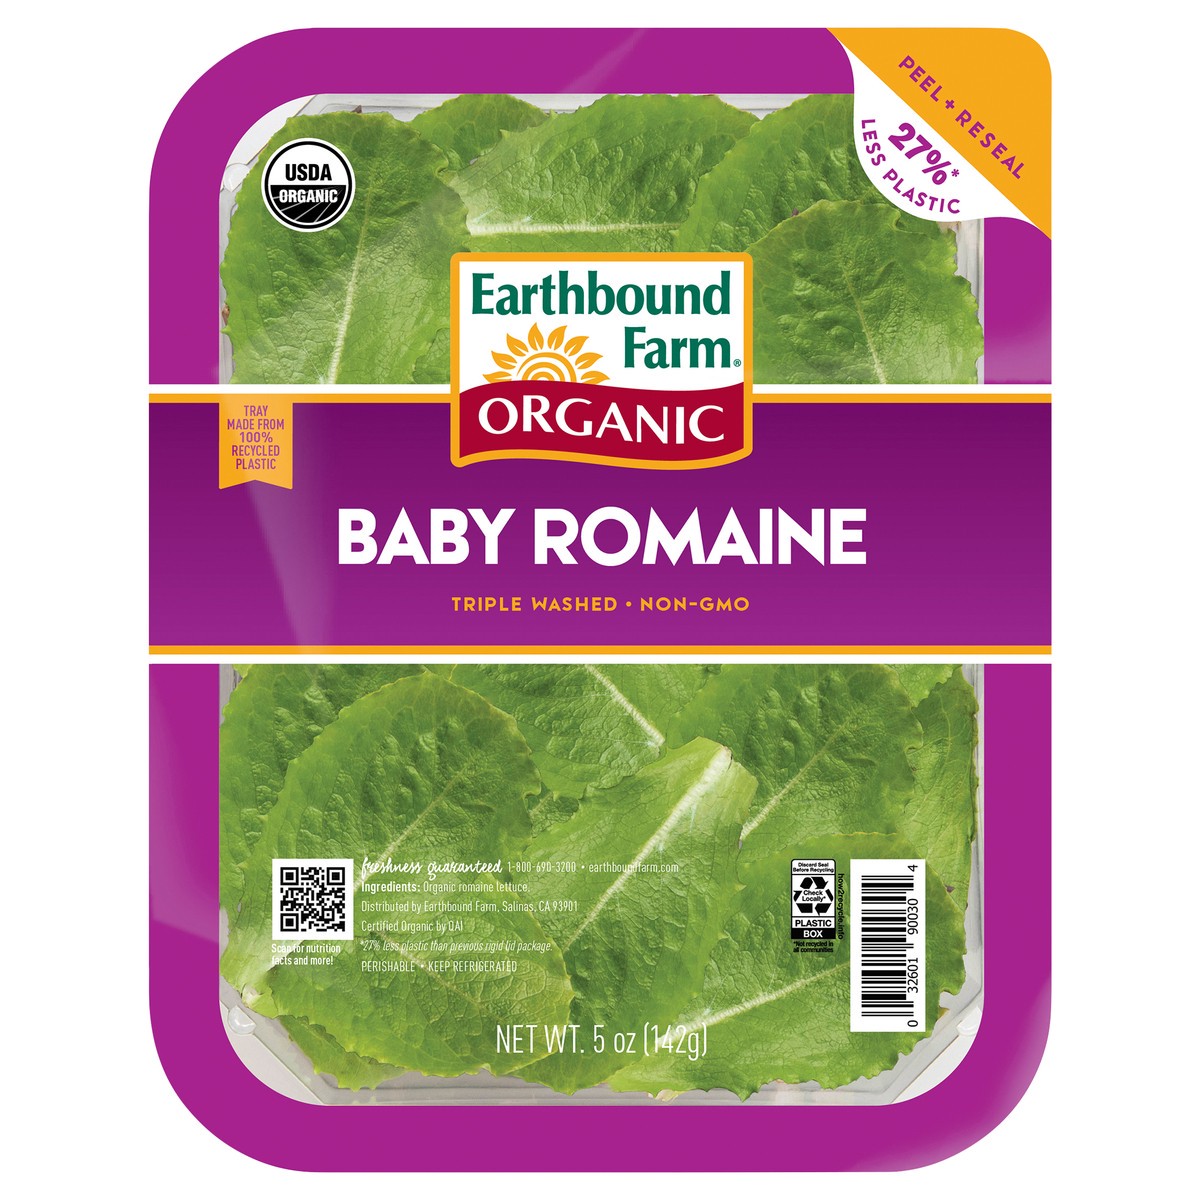 slide 1 of 3, Earthbound Farm Earth Bound Organic Baby Romaine Clamshell, 5 oz